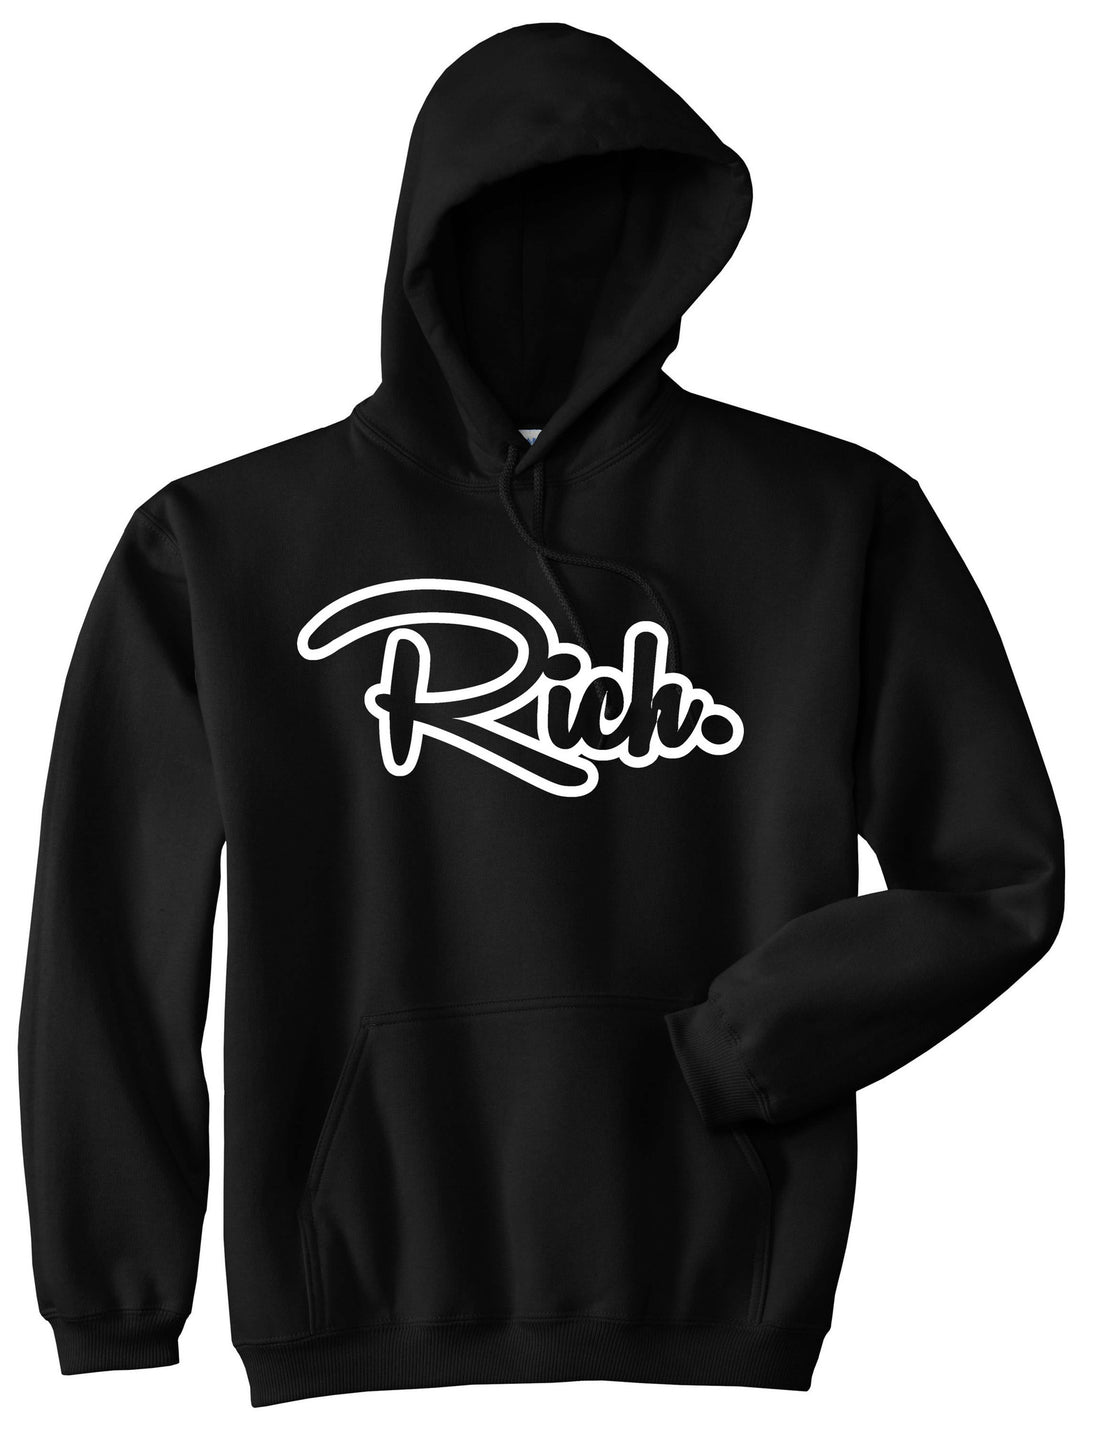 Rich Money Fab Style New York Richie NYC Boys Kids Pullover Hoodie Hoody In Black by Kings Of NY